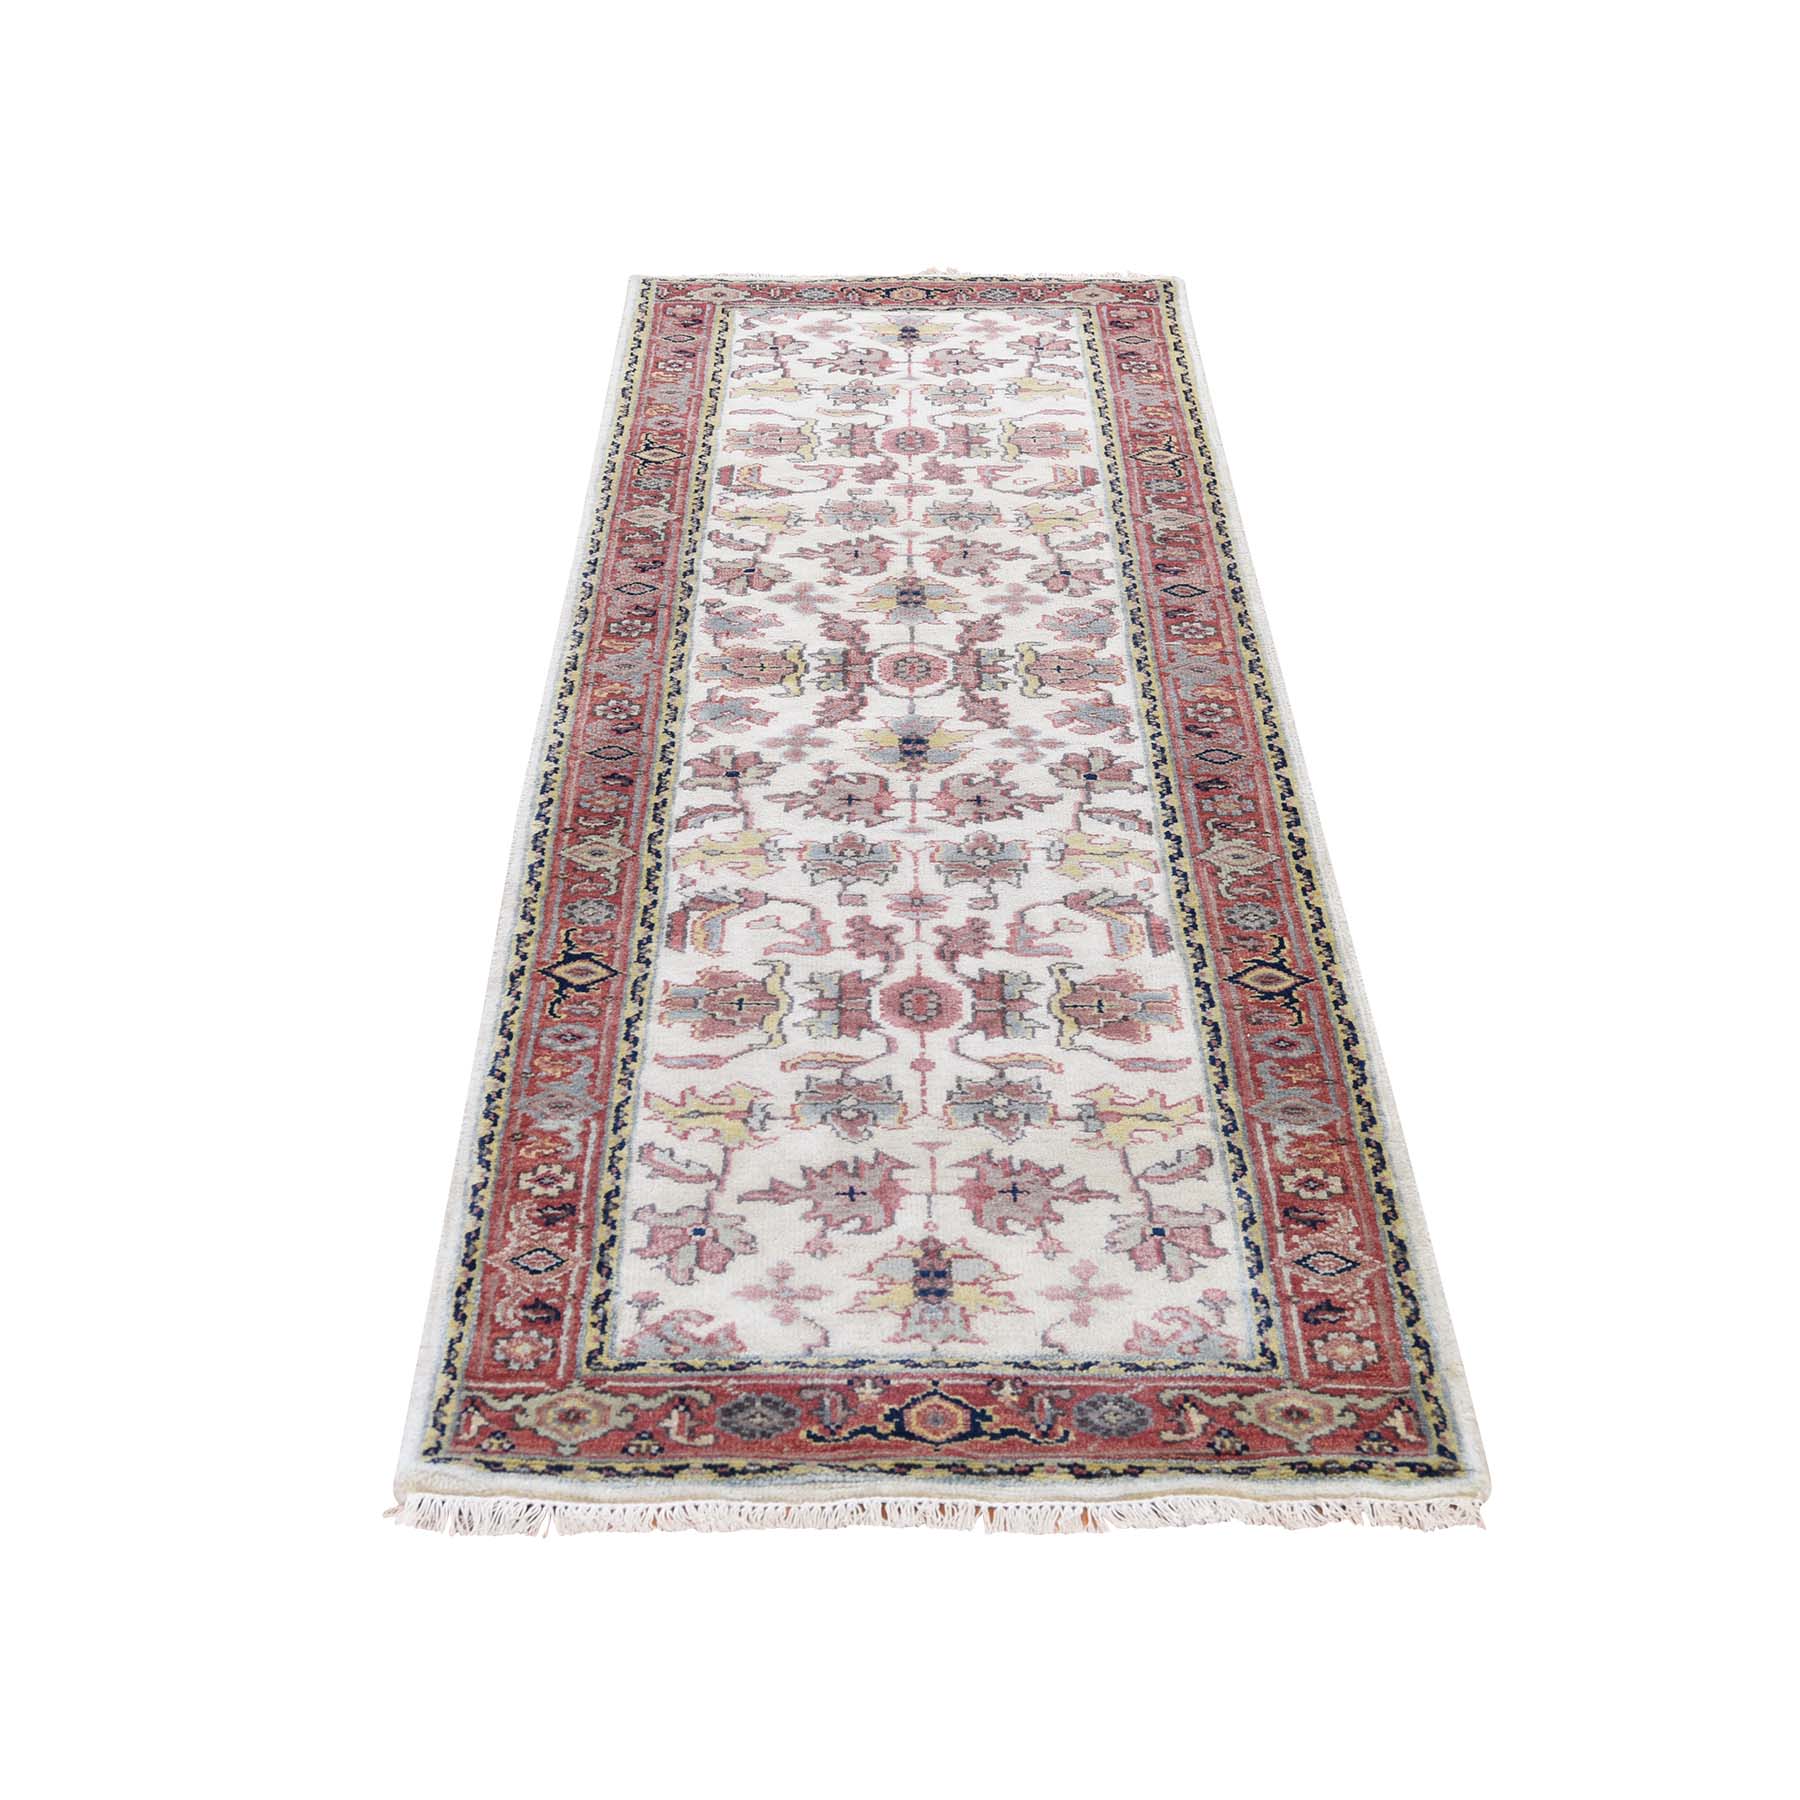 2'6"X7'9" Ivory Heriz Revival All Over Design Pure Wool Hand-Knotted Oriental Runner Rug moad668d